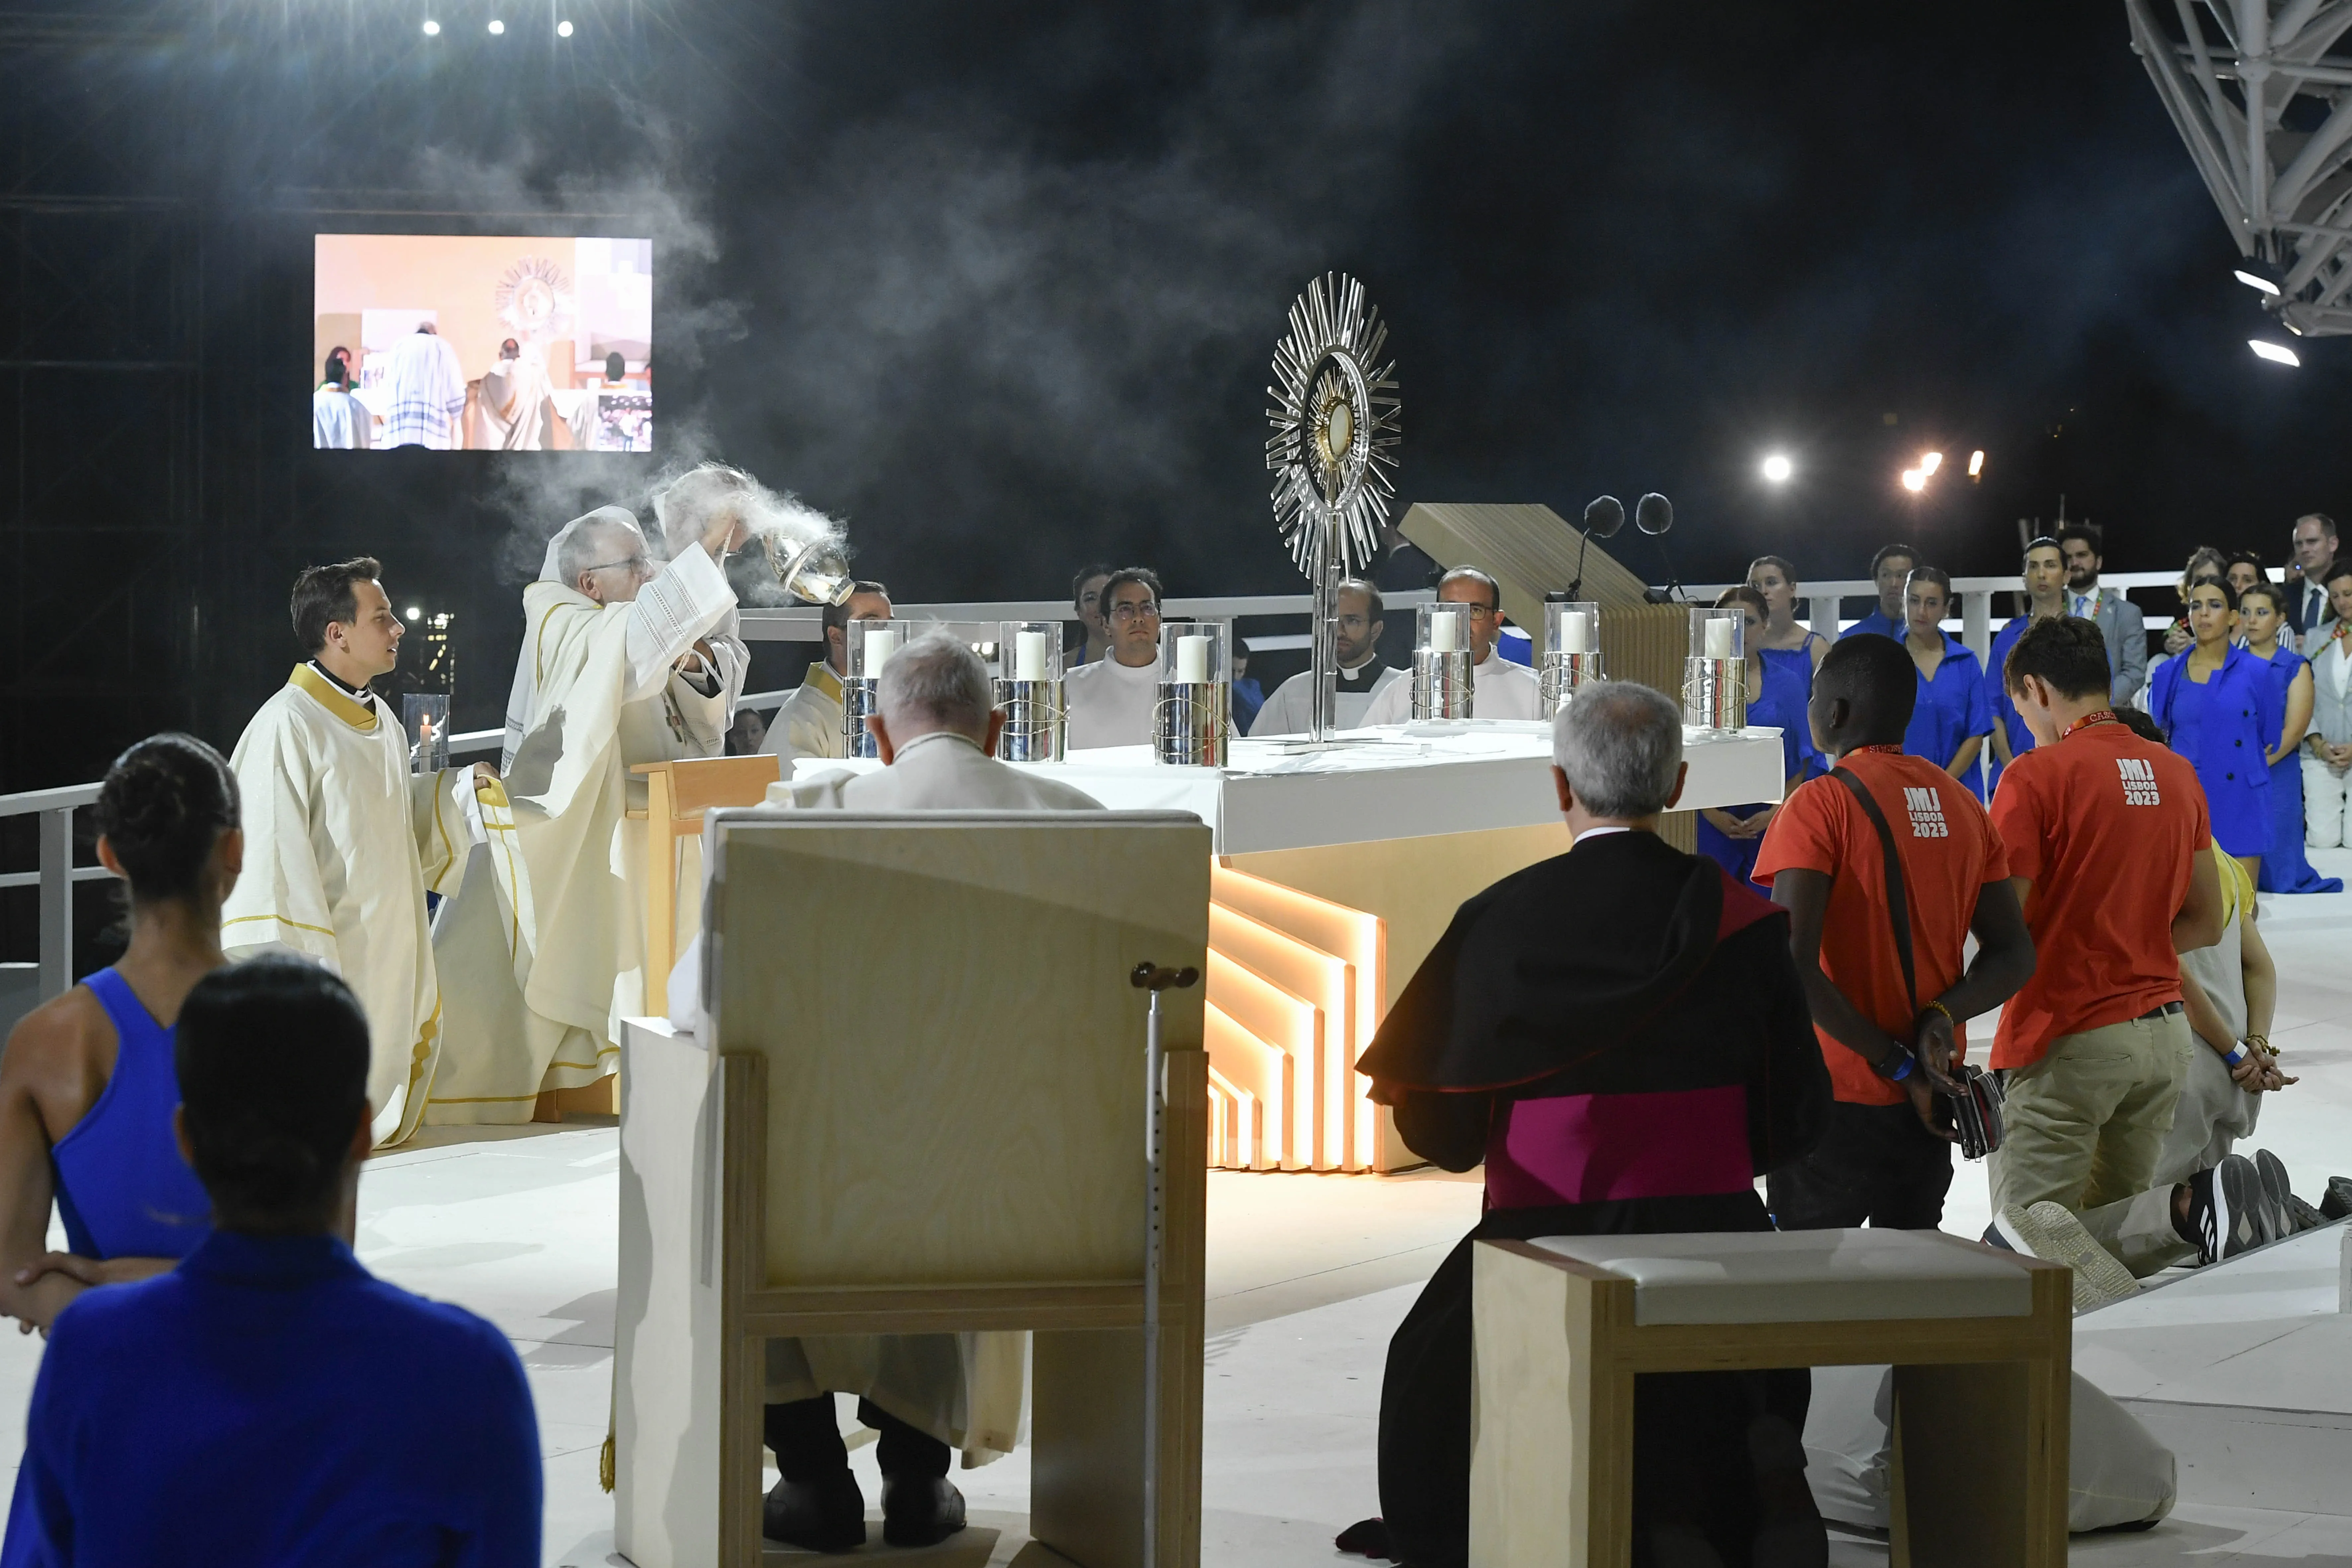 Eucharistic adoration followed an address by Pope Francis at the Saturday vigil for World Youth Day in Lisbon, Portugal’s Parque Tejo on Aug. 5, 2023. Credit: Vatican Media